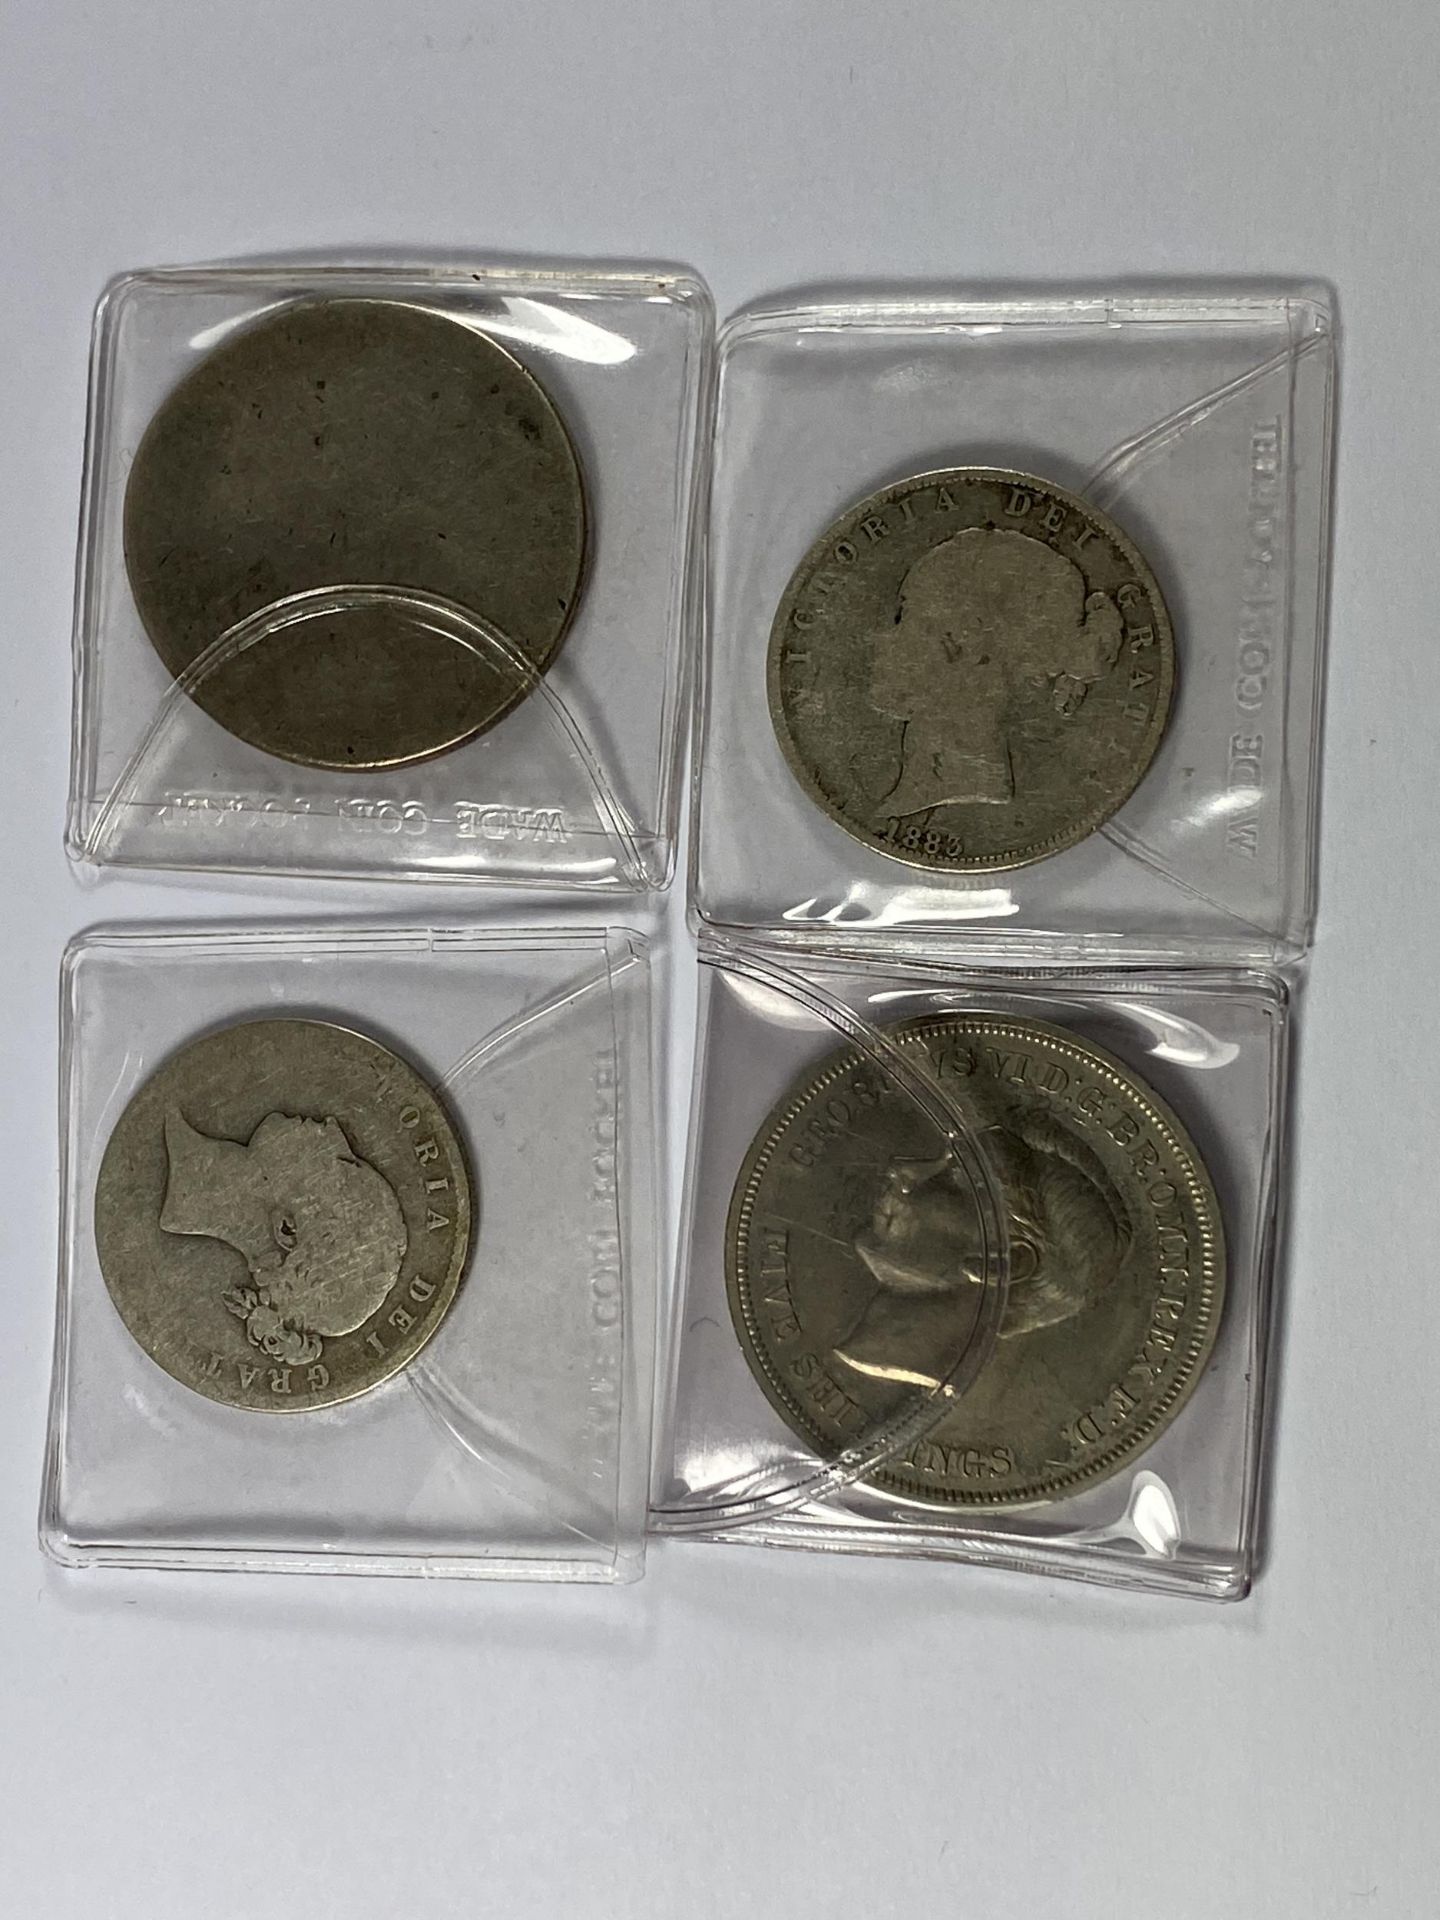 A WILLIAM III SILVER CROWN (WORN), GEORGE VI CROWN DATED 1951 & TWO VICTORIAN SILVER HALF CROWNS - Image 4 of 4